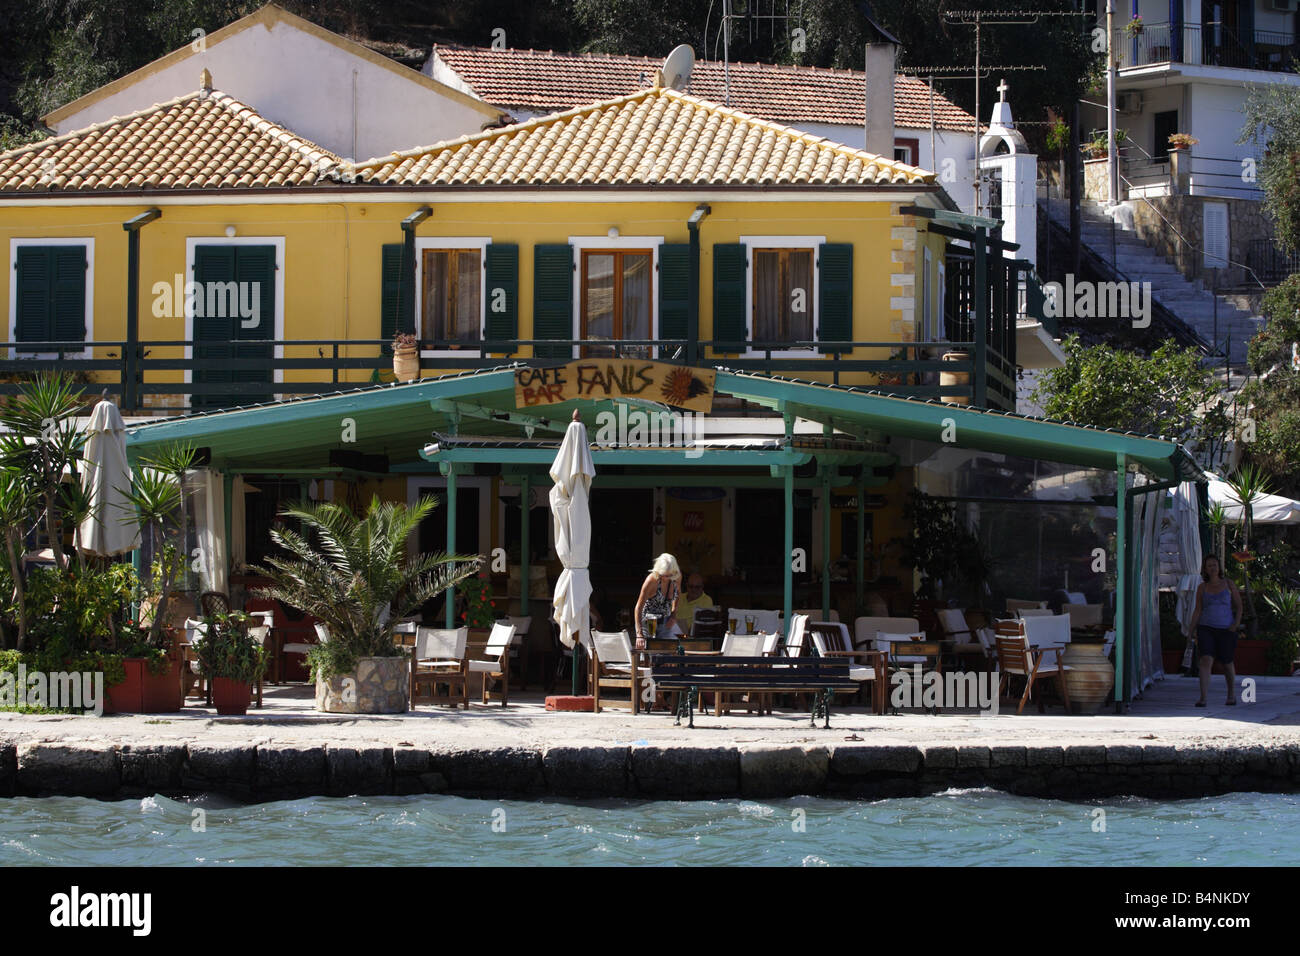 View of Fanis cafe restaurant in the village of Lakka in Paxos, Greek Ionian Island Greece Stock Photo